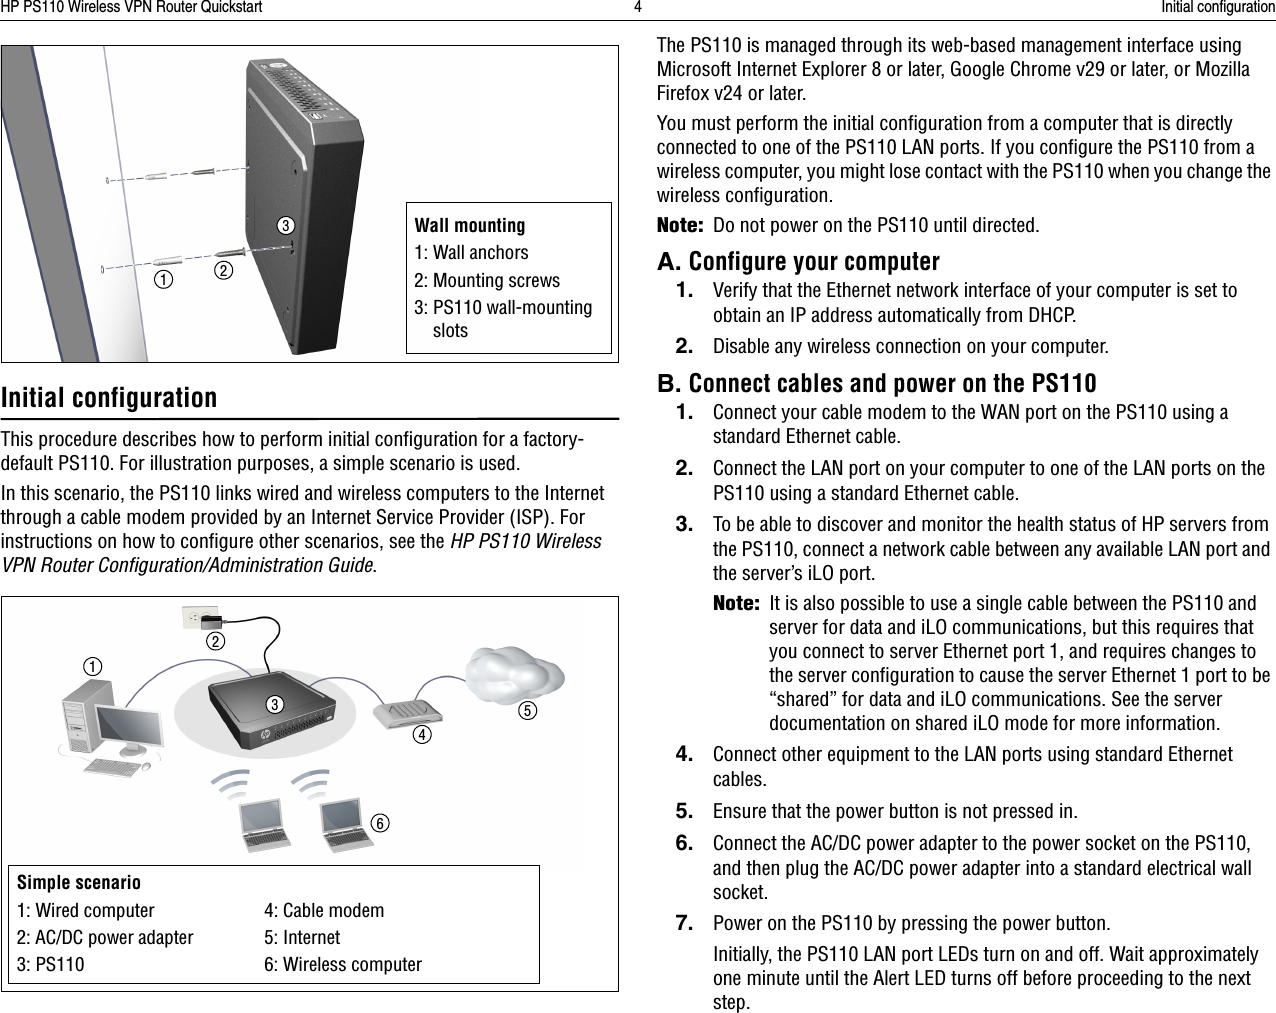 HP PS110 Wireless VPN Router Quickstart 4 Initial configurationInitial configurationThis procedure describes how to perform initial configuration for a factory-default PS110. For illustration purposes, a simple scenario is used.In this scenario, the PS110 links wired and wireless computers to the Internet through a cable modem provided by an Internet Service Provider (ISP). For instructions on how to configure other scenarios, see the HP PS110 Wireless VPN Router Configuration/Administration Guide.The PS110 is managed through its web-based management interface using Microsoft Internet Explorer 8 or later, Google Chrome v29 or later, or Mozilla Firefox v24 or later. You must perform the initial configuration from a computer that is directly connected to one of the PS110 LAN ports. If you configure the PS110 from a wireless computer, you might lose contact with the PS110 when you change the wireless configuration.Note:Do not power on the PS110 until directed.A. Configure your computer1. Verify that the Ethernet network interface of your computer is set to obtain an IP address automatically from DHCP. 2. Disable any wireless connection on your computer.B. Connect cables and power on the PS1101. Connect your cable modem to the WAN port on the PS110 using a standard Ethernet cable.2. Connect the LAN port on your computer to one of the LAN ports on the PS110 using a standard Ethernet cable. 3. To be able to discover and monitor the health status of HP servers from the PS110, connect a network cable between any available LAN port and the server’s iLO port.Note:It is also possible to use a single cable between the PS110 and server for data and iLO communications, but this requires that you connect to server Ethernet port 1, and requires changes to the server configuration to cause the server Ethernet 1 port to be “shared” for data and iLO communications. See the server documentation on shared iLO mode for more information.4. Connect other equipment to the LAN ports using standard Ethernet cables.5. Ensure that the power button is not pressed in.6. Connect the AC/DC power adapter to the power socket on the PS110, and then plug the AC/DC power adapter into a standard electrical wall socket.7. Power on the PS110 by pressing the power button.Initially, the PS110 LAN port LEDs turn on and off. Wait approximately one minute until the Alert LED turns off before proceeding to the next step.Wall mounting1: Wall anchors2: Mounting screws3: PS110 wall-mounting slots132Simple scenario1: Wired computer 4: Cable modem2: AC/DC power adapter 5: Internet3: PS110 6: Wireless computer123456